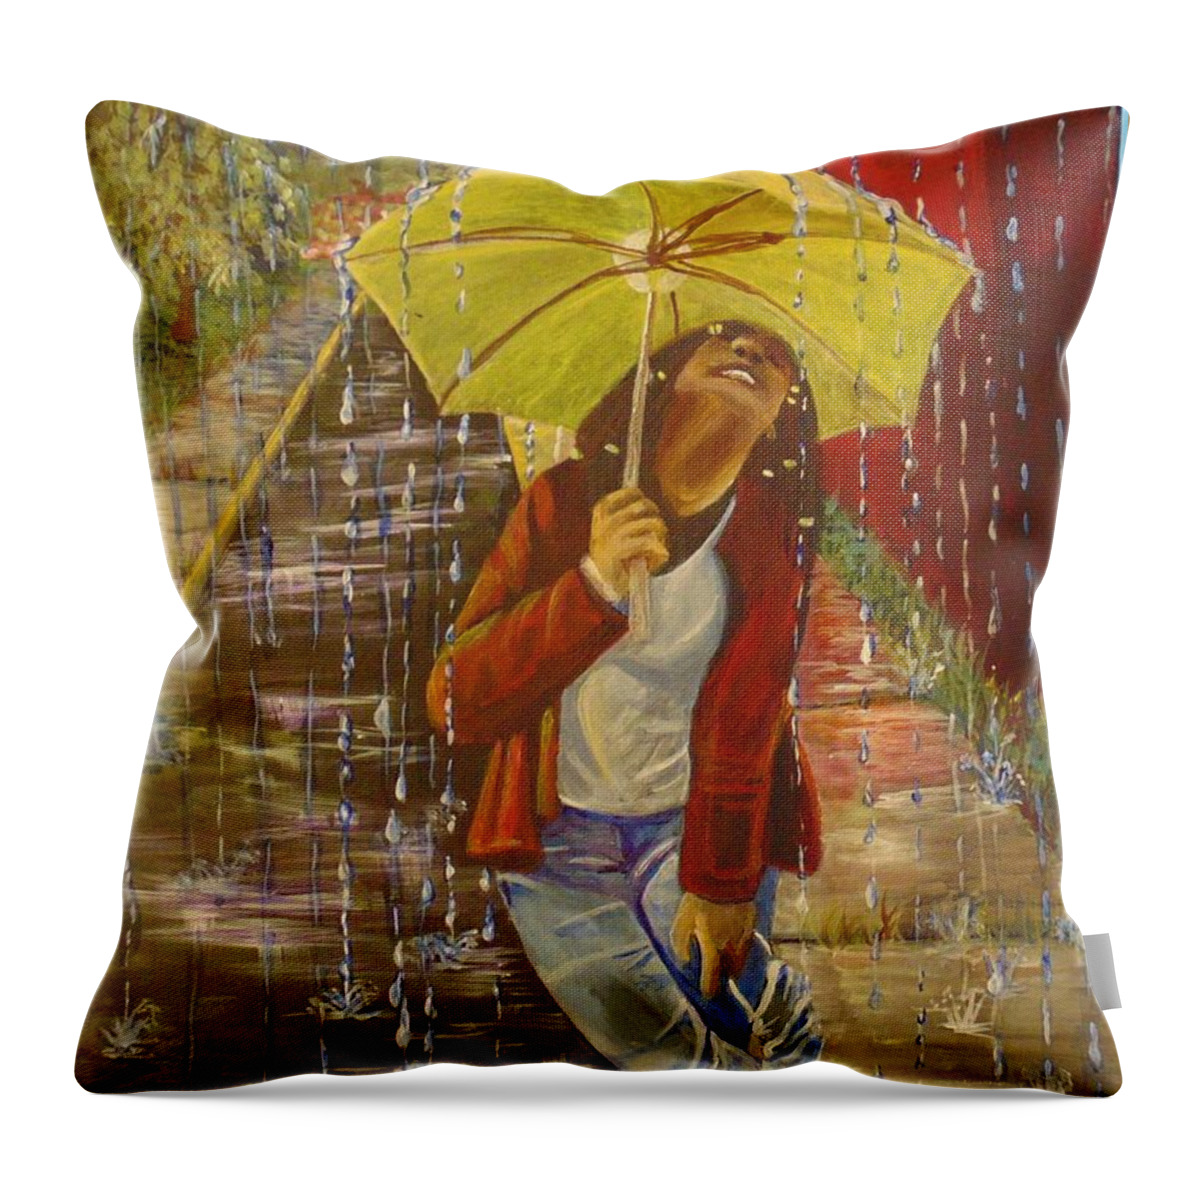 2021 Throw Pillow featuring the painting Mmxxi by Saundra Johnson